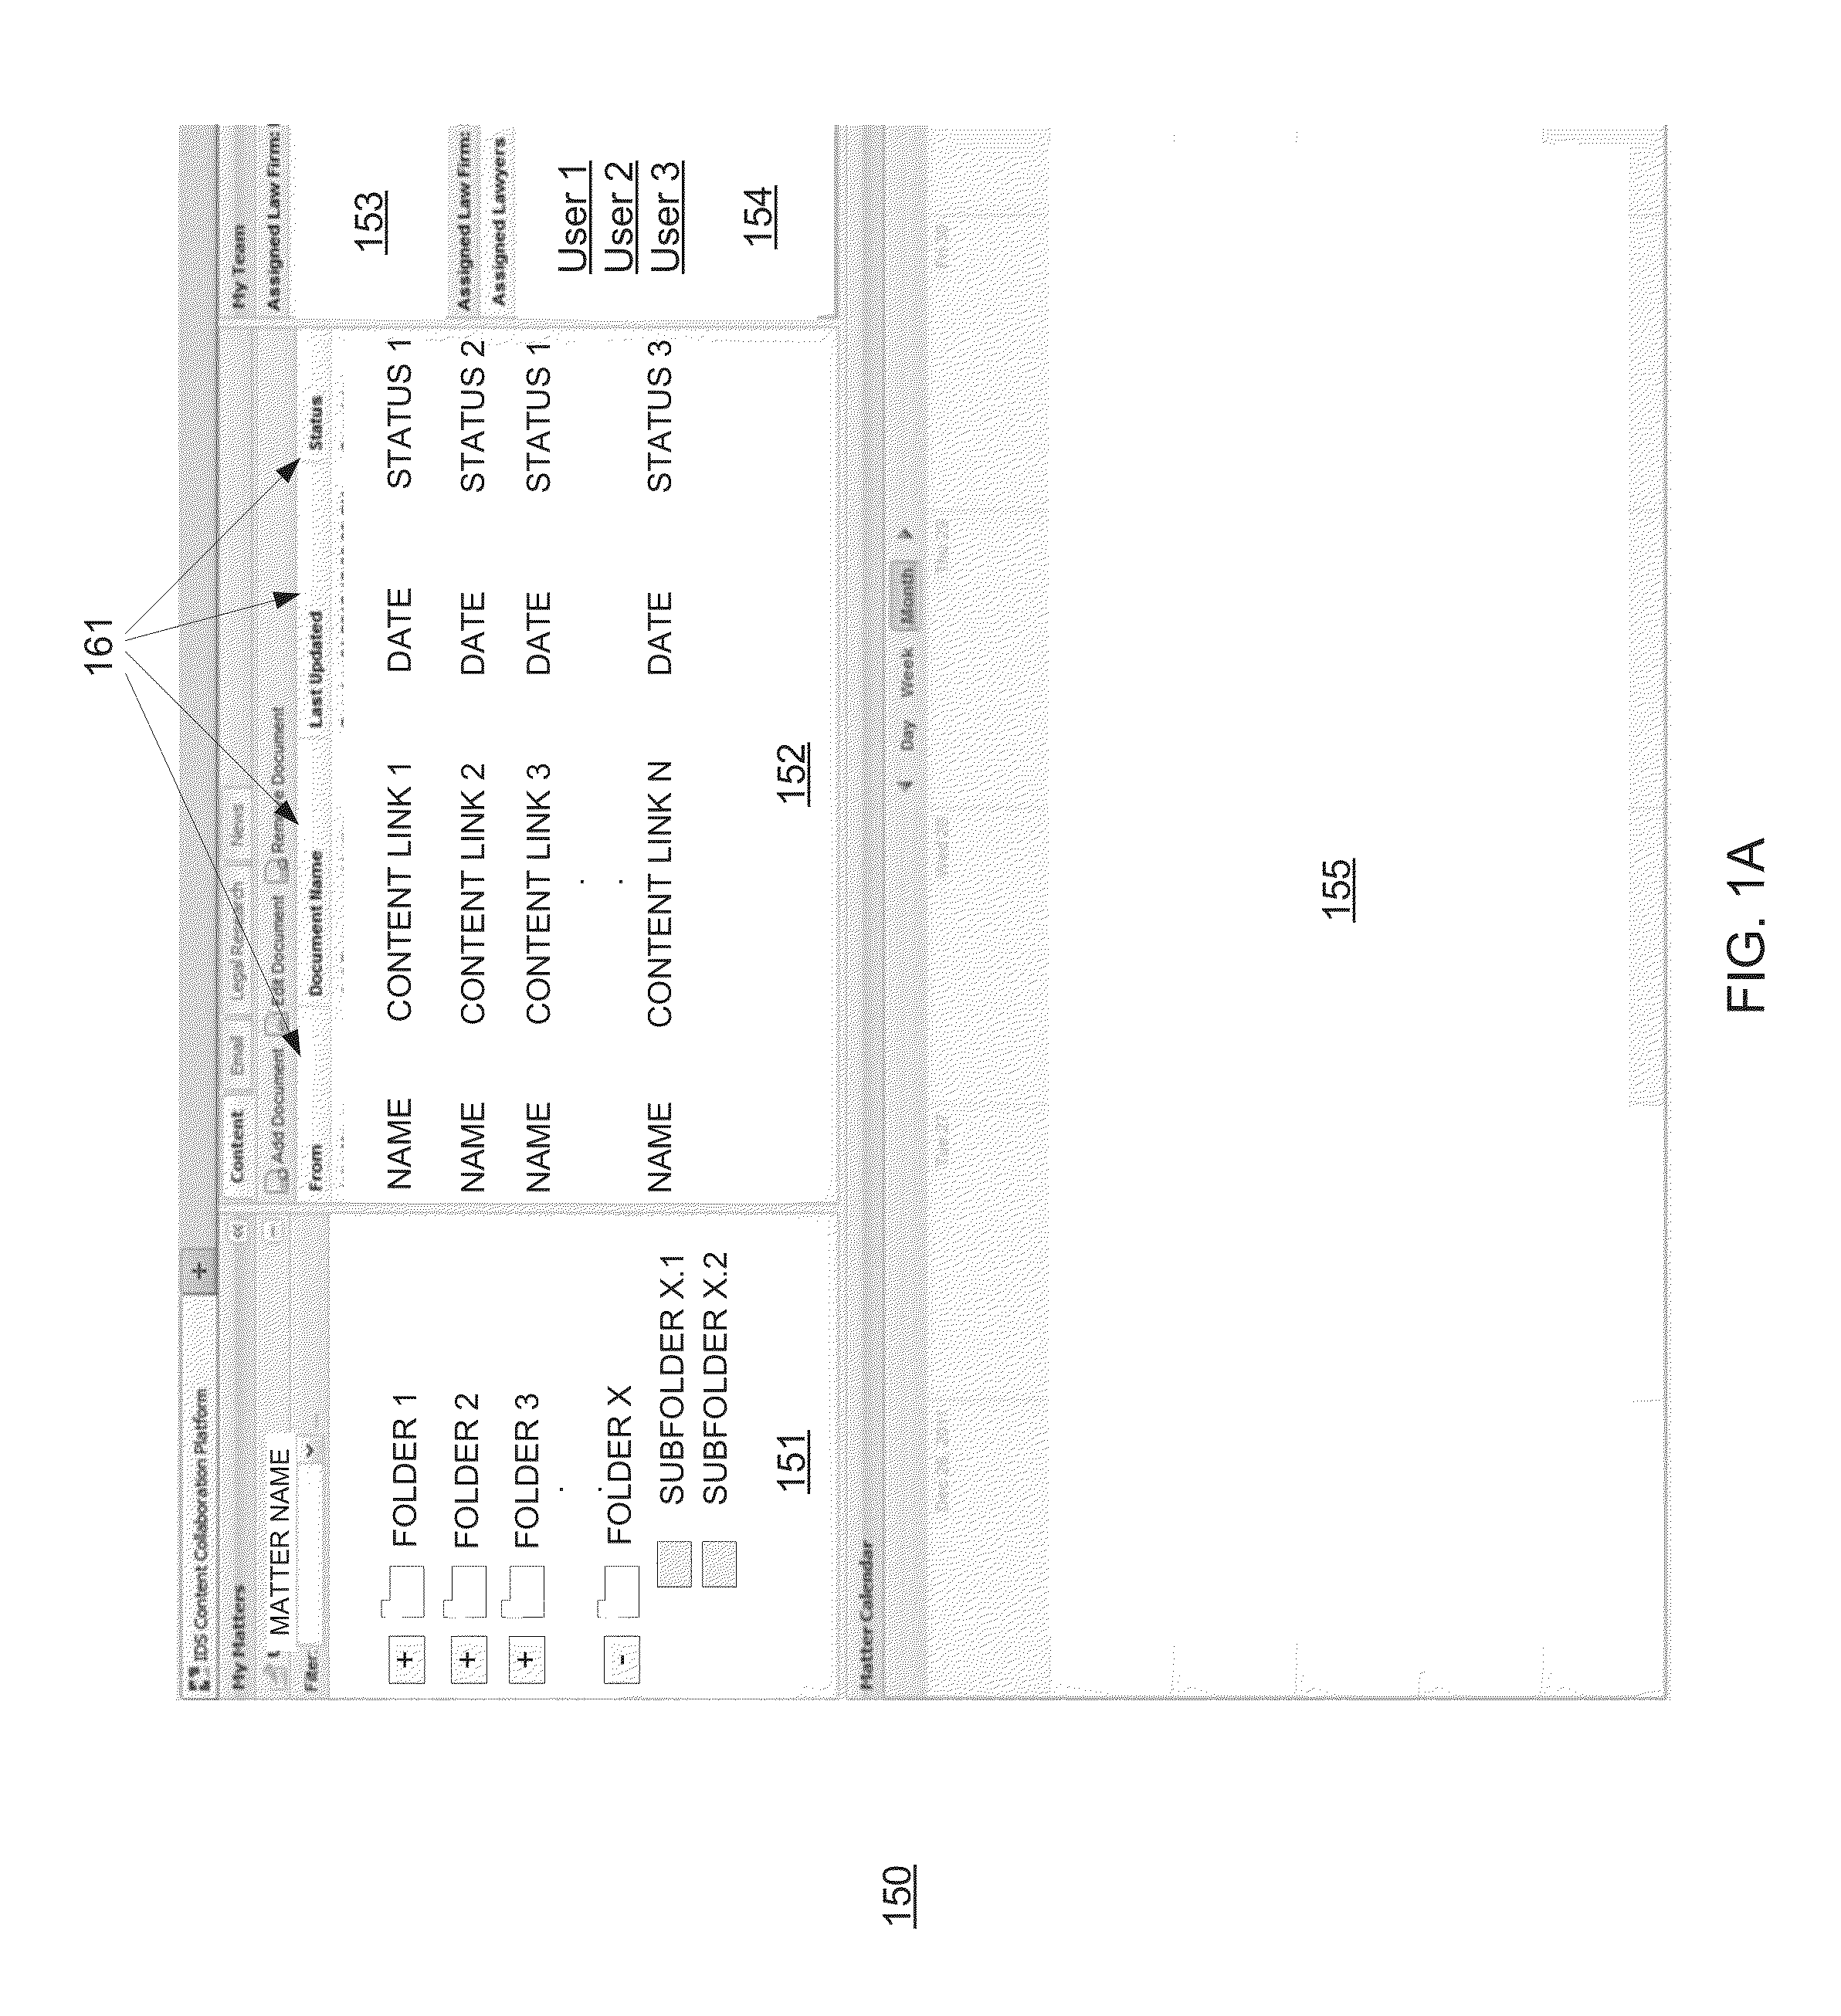 System and method for synchronizing bi-directional document management